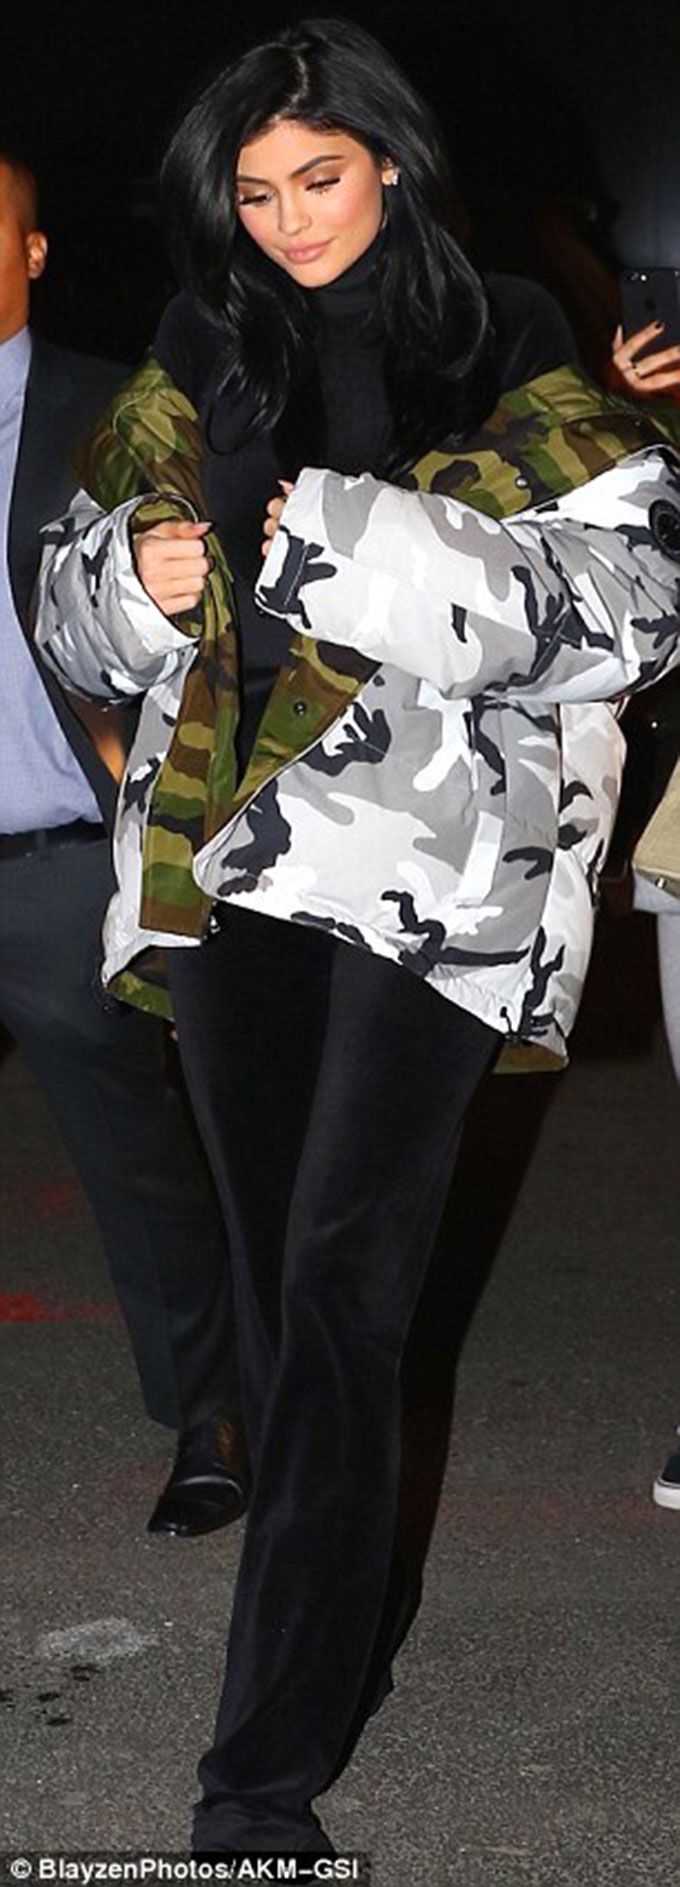 Kylie Jenner in Vetements x Canada Goose | Image Source: dailymail.co.uk